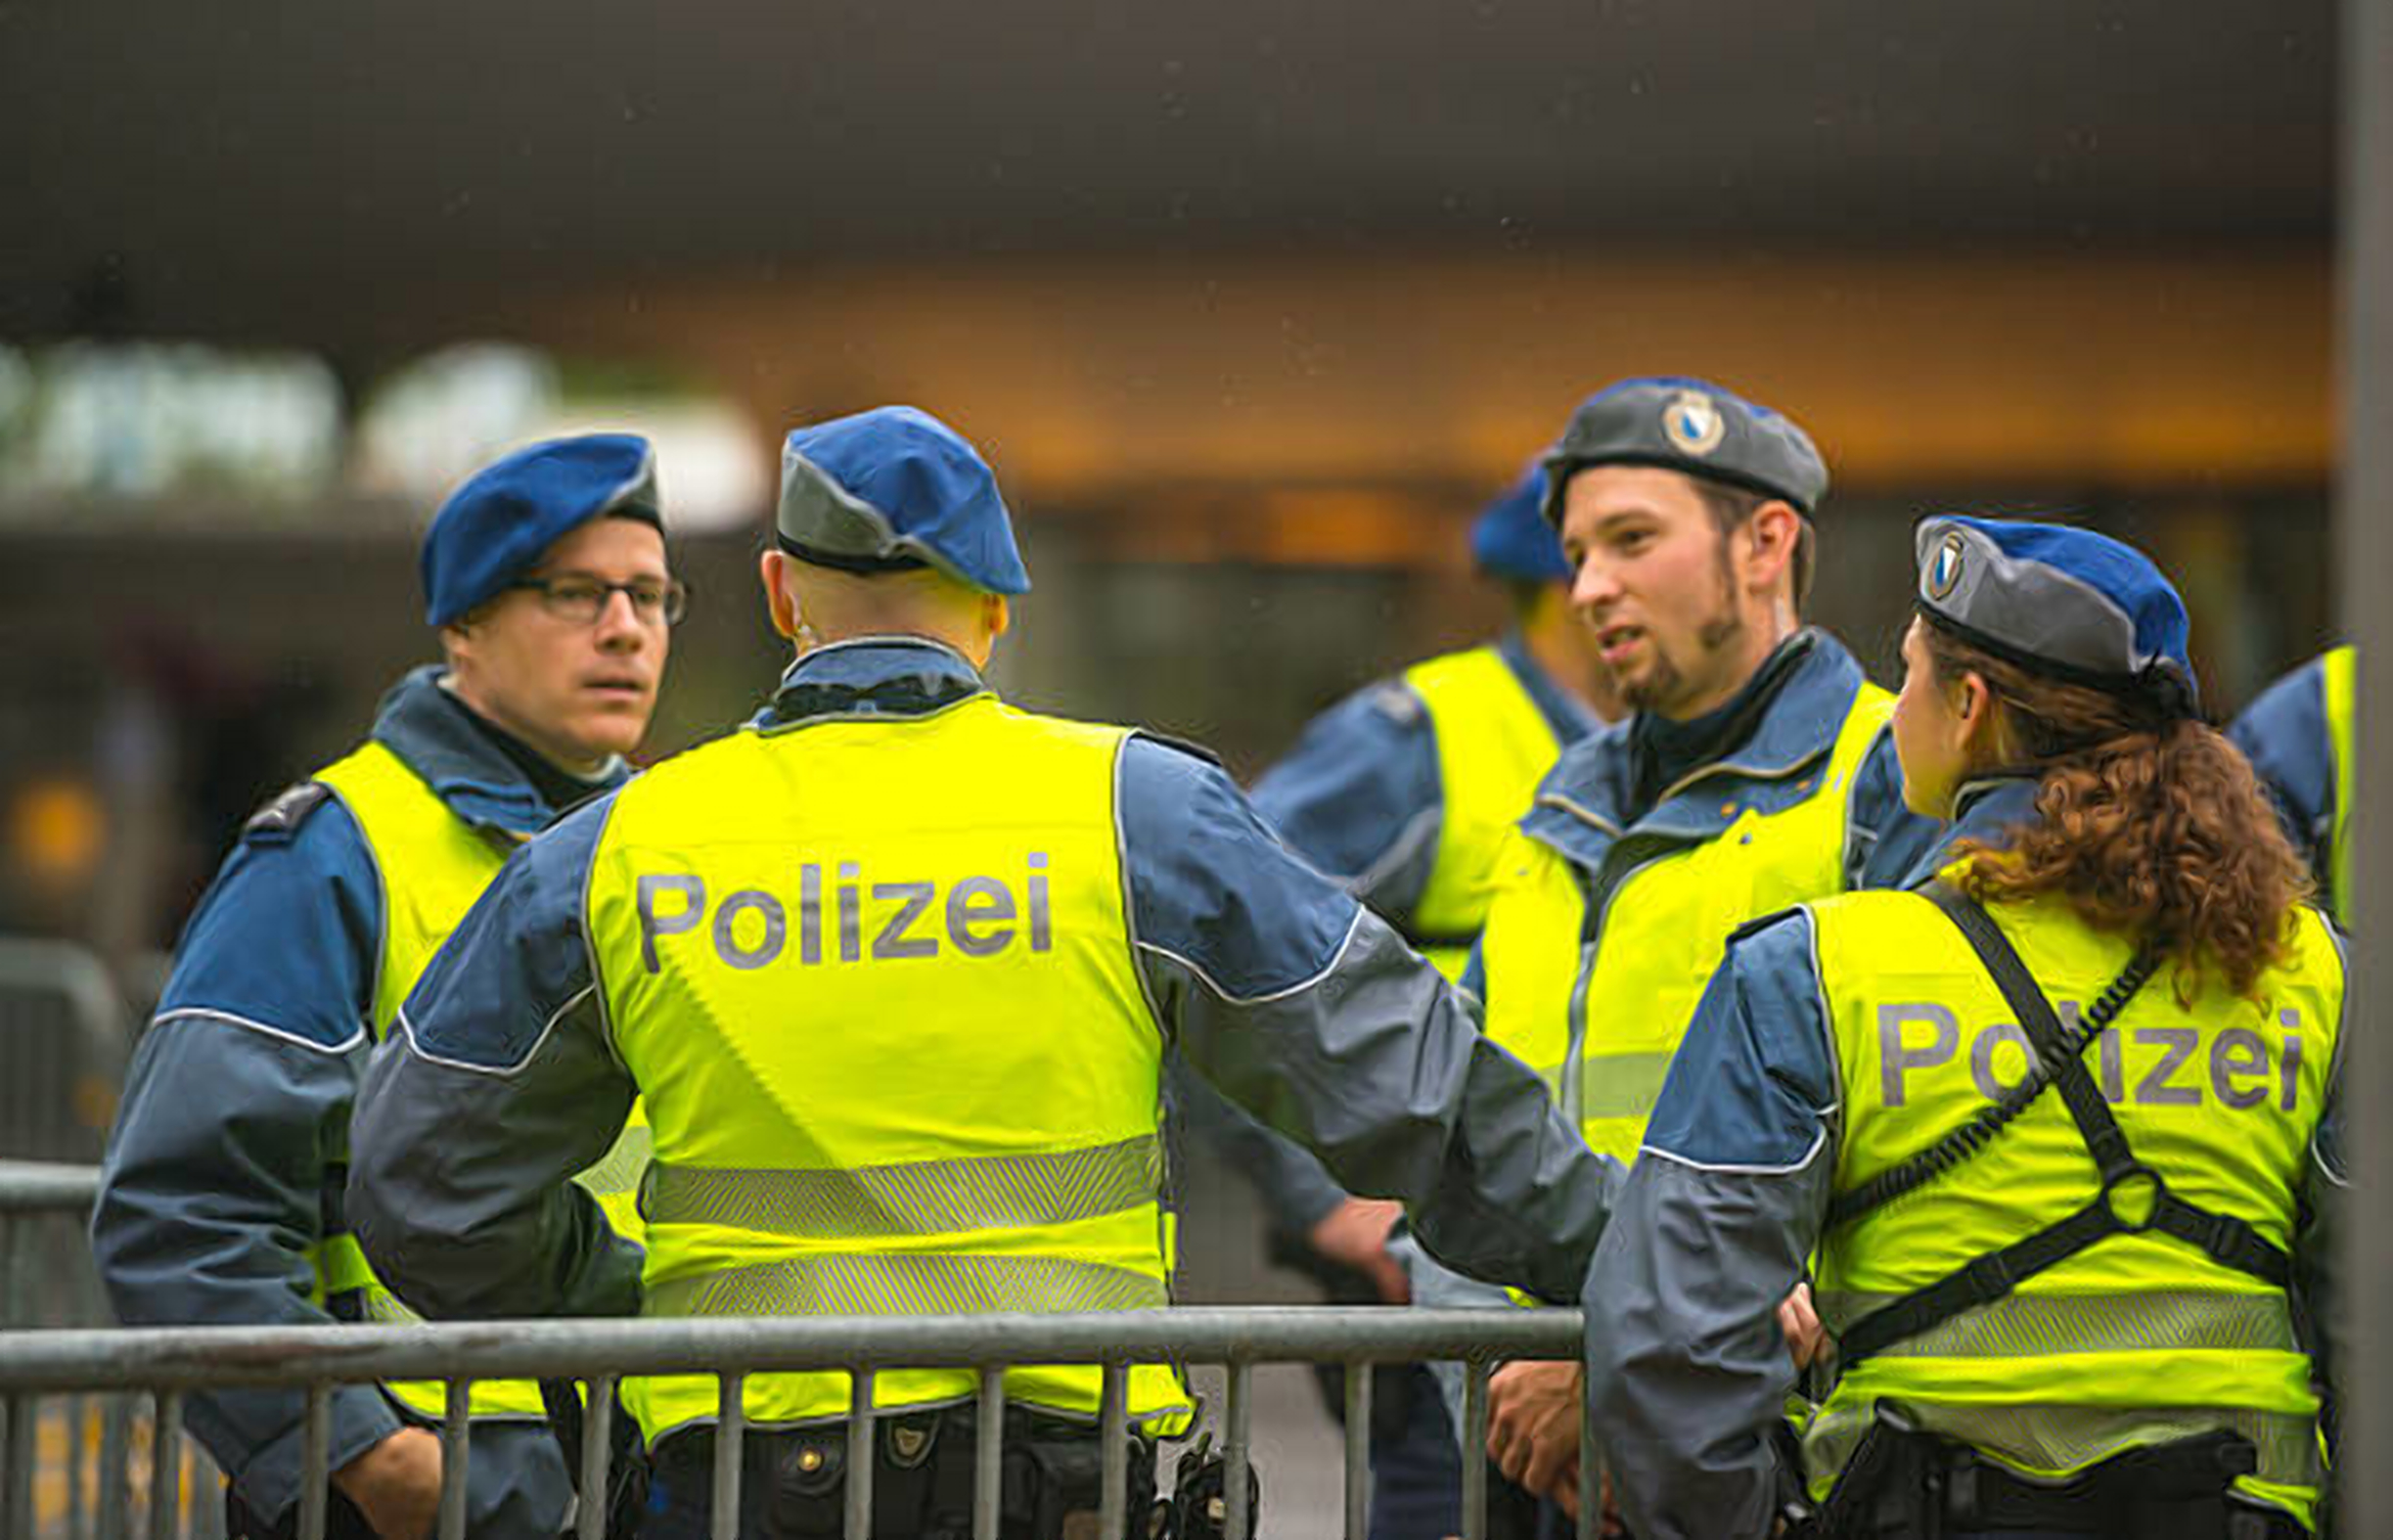 Counter-terrorism ـMore police powers for more security  in Switzerland